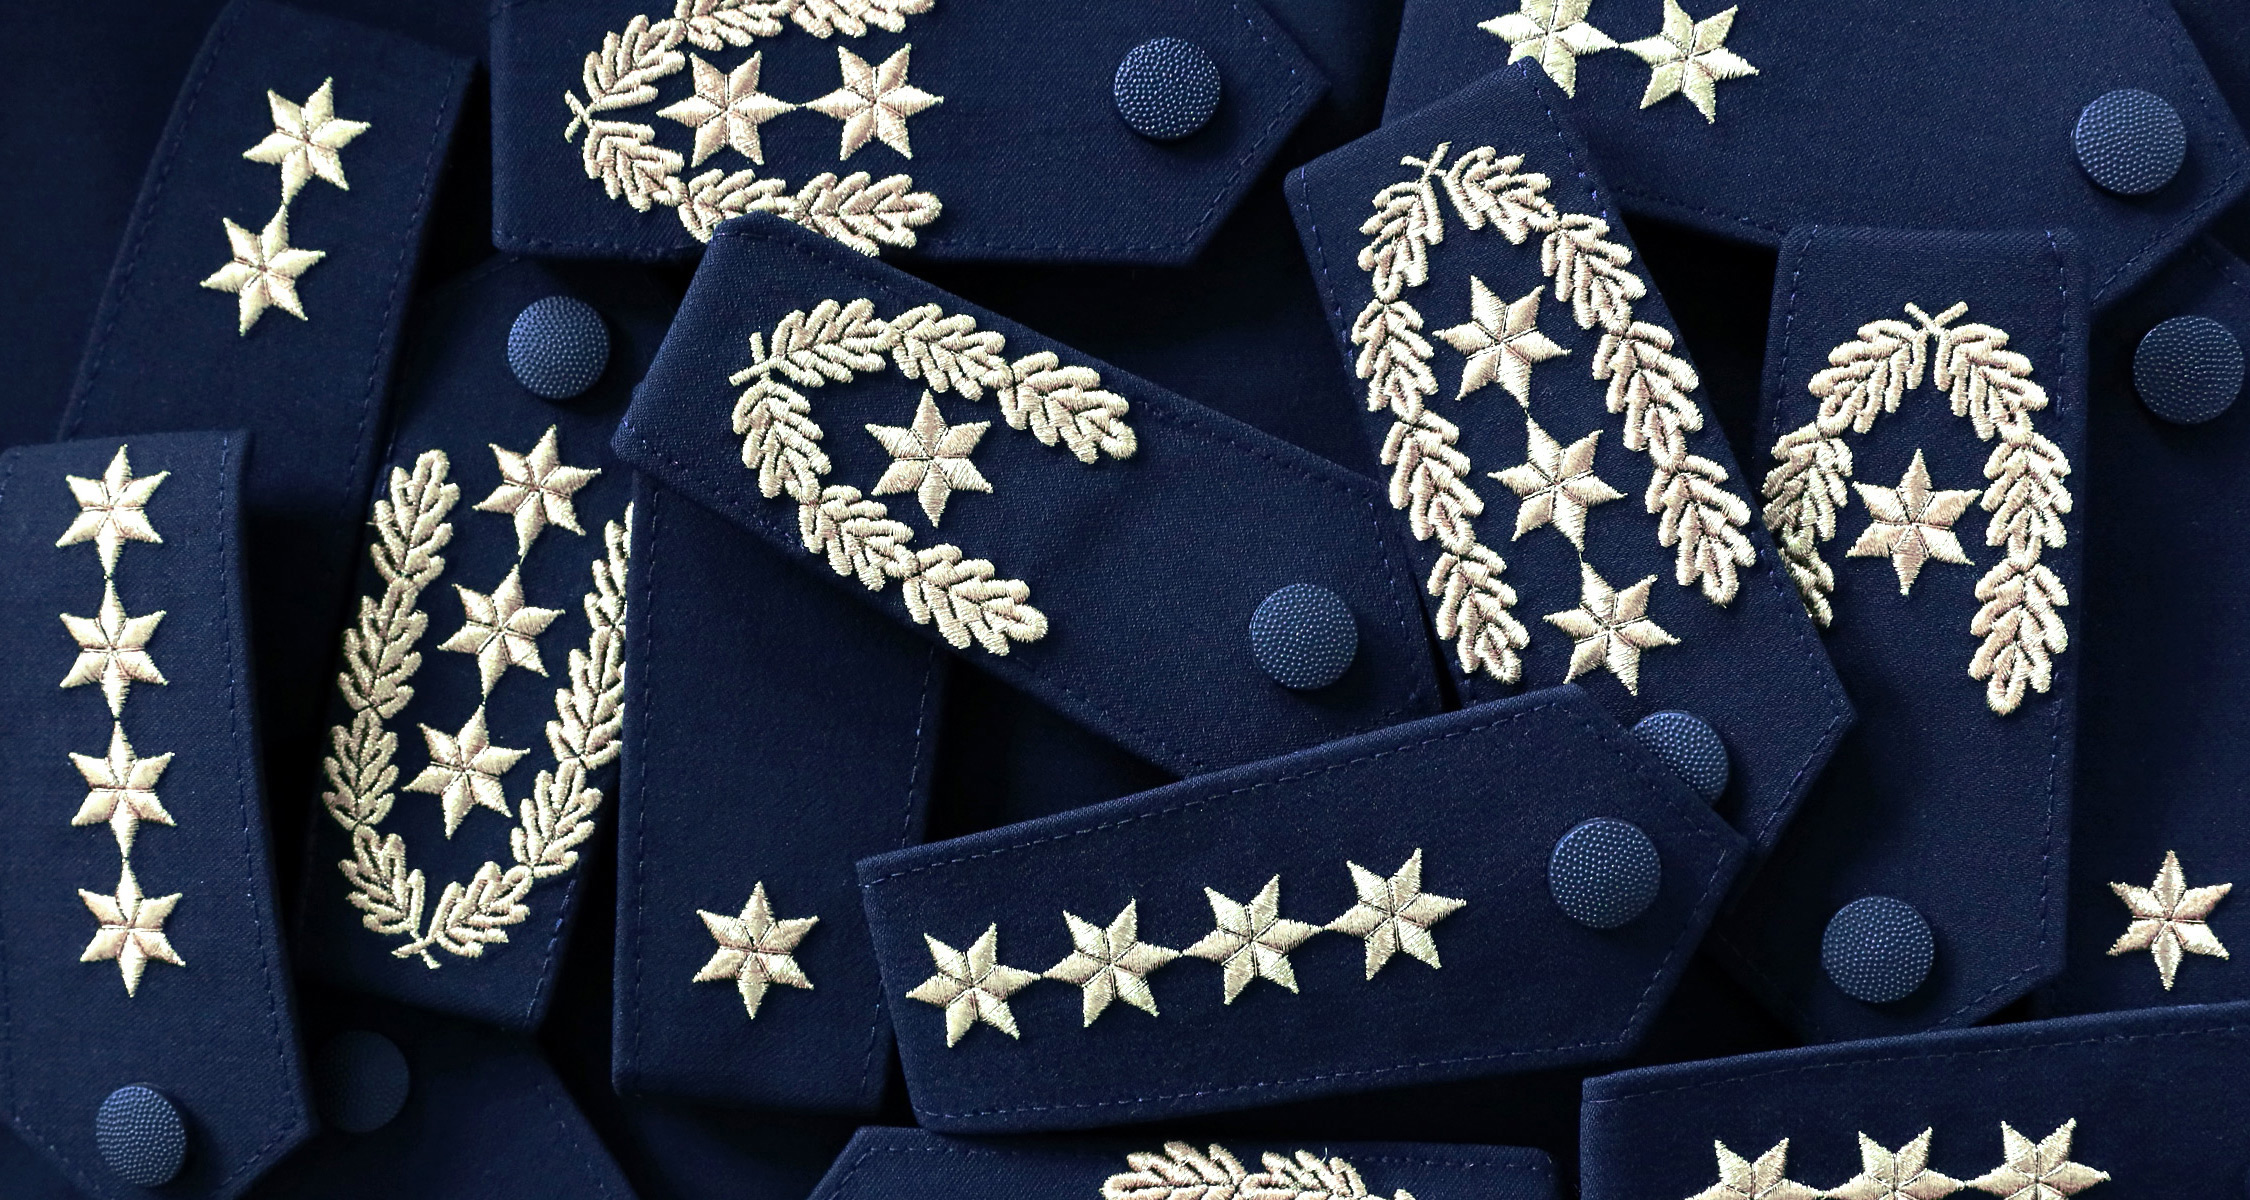 Epaulettes of different ranks of the higher service lie randomly on top of each other